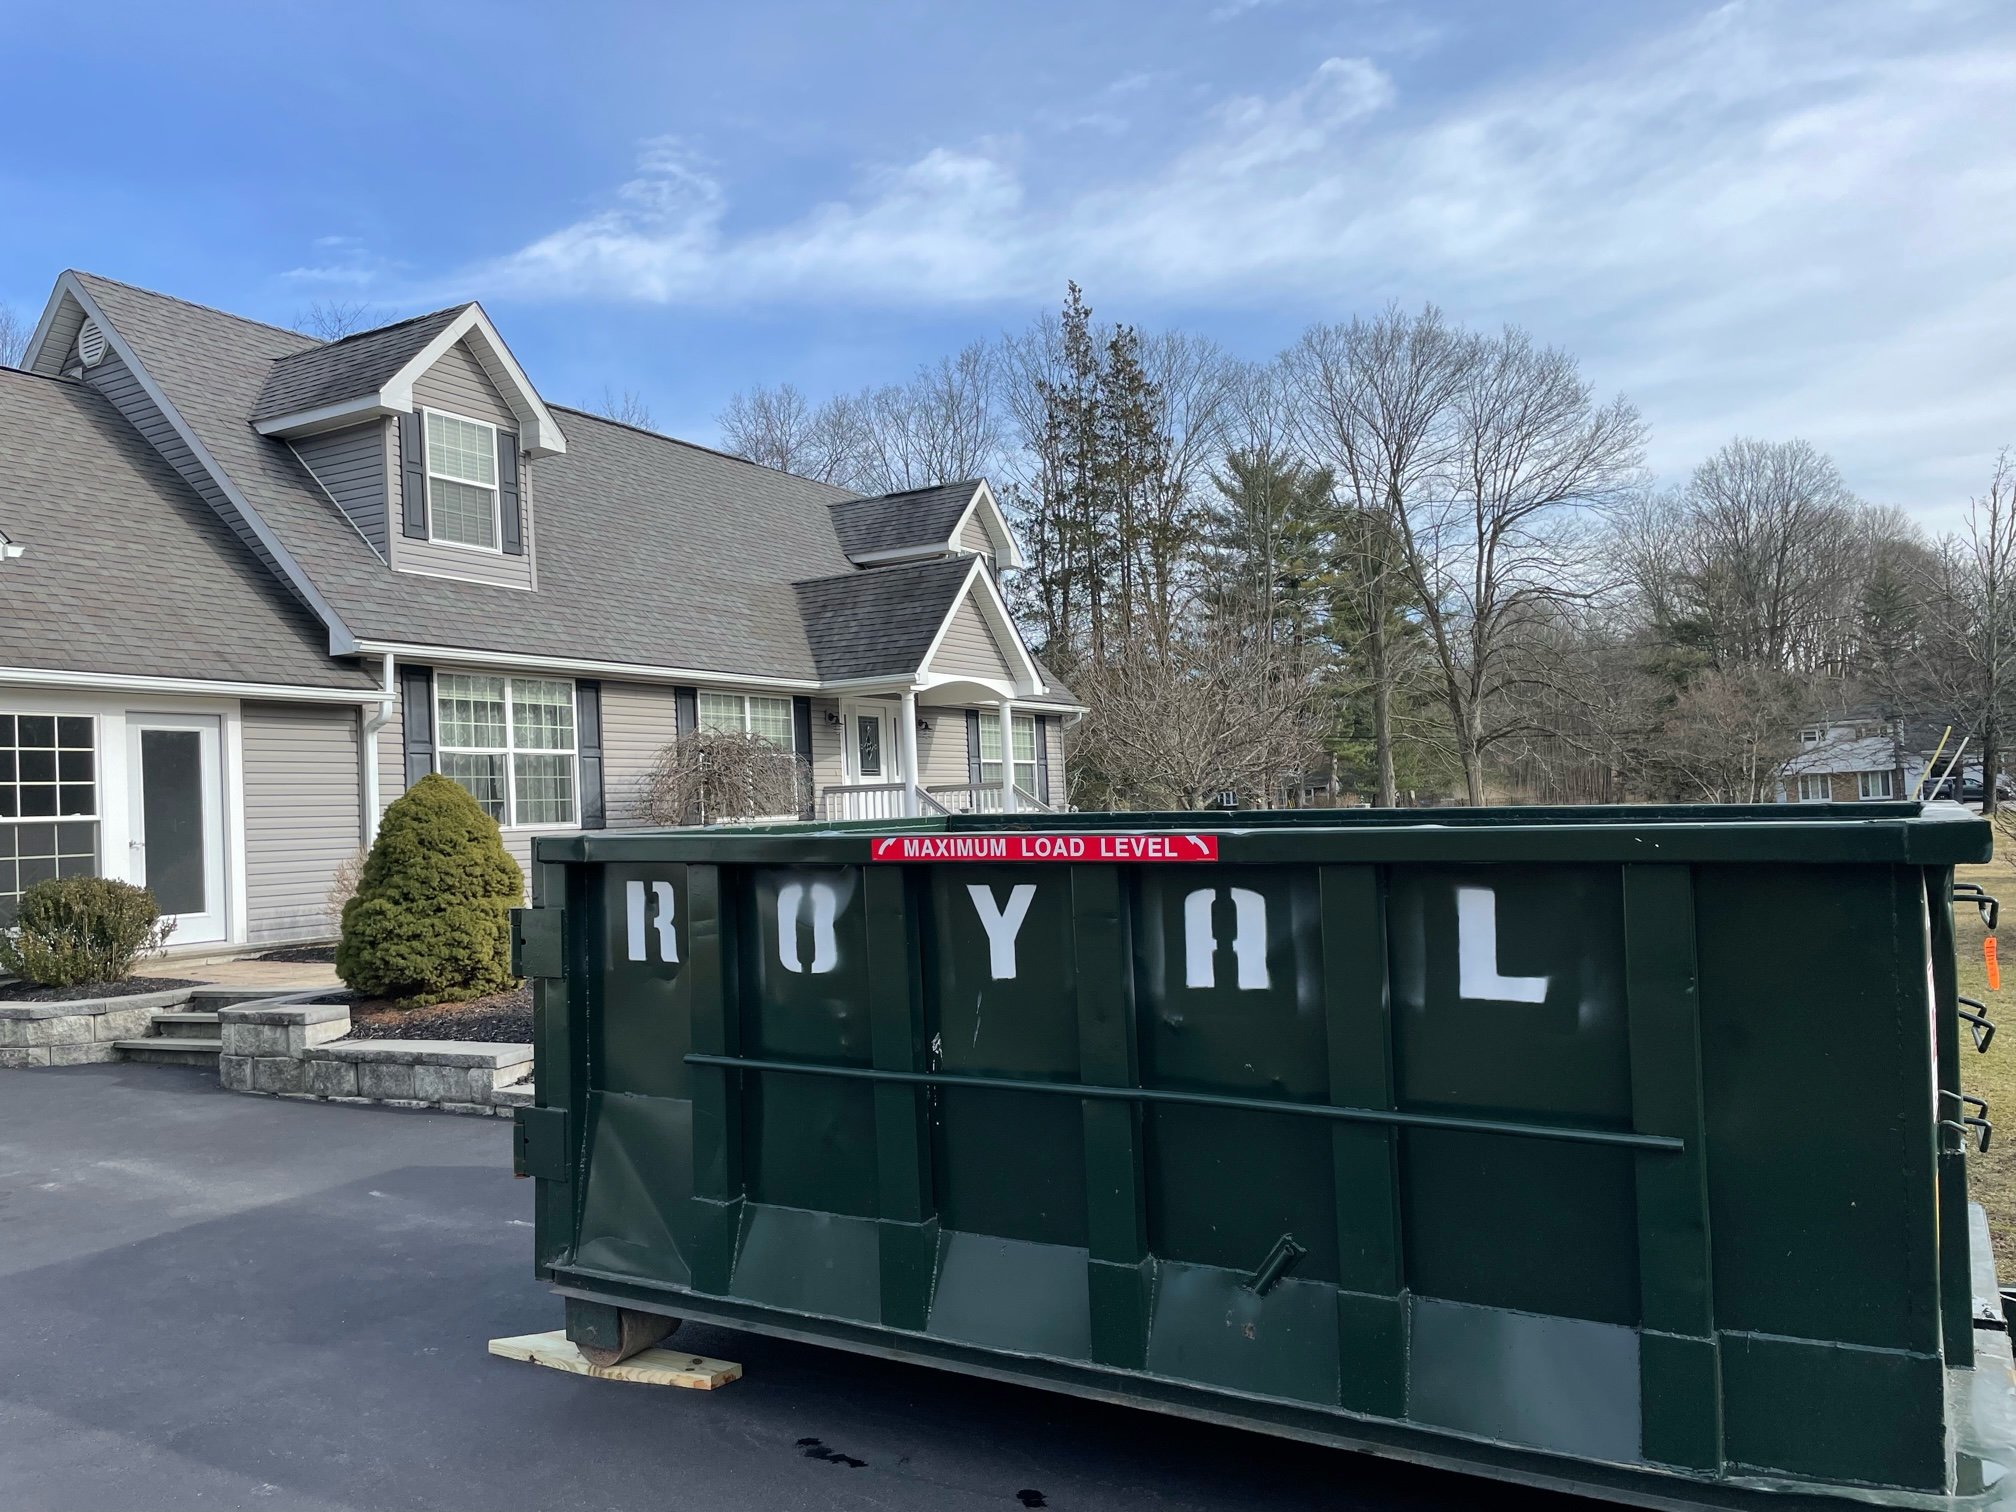 Royal Carting roll-off dumpster outside a residential home